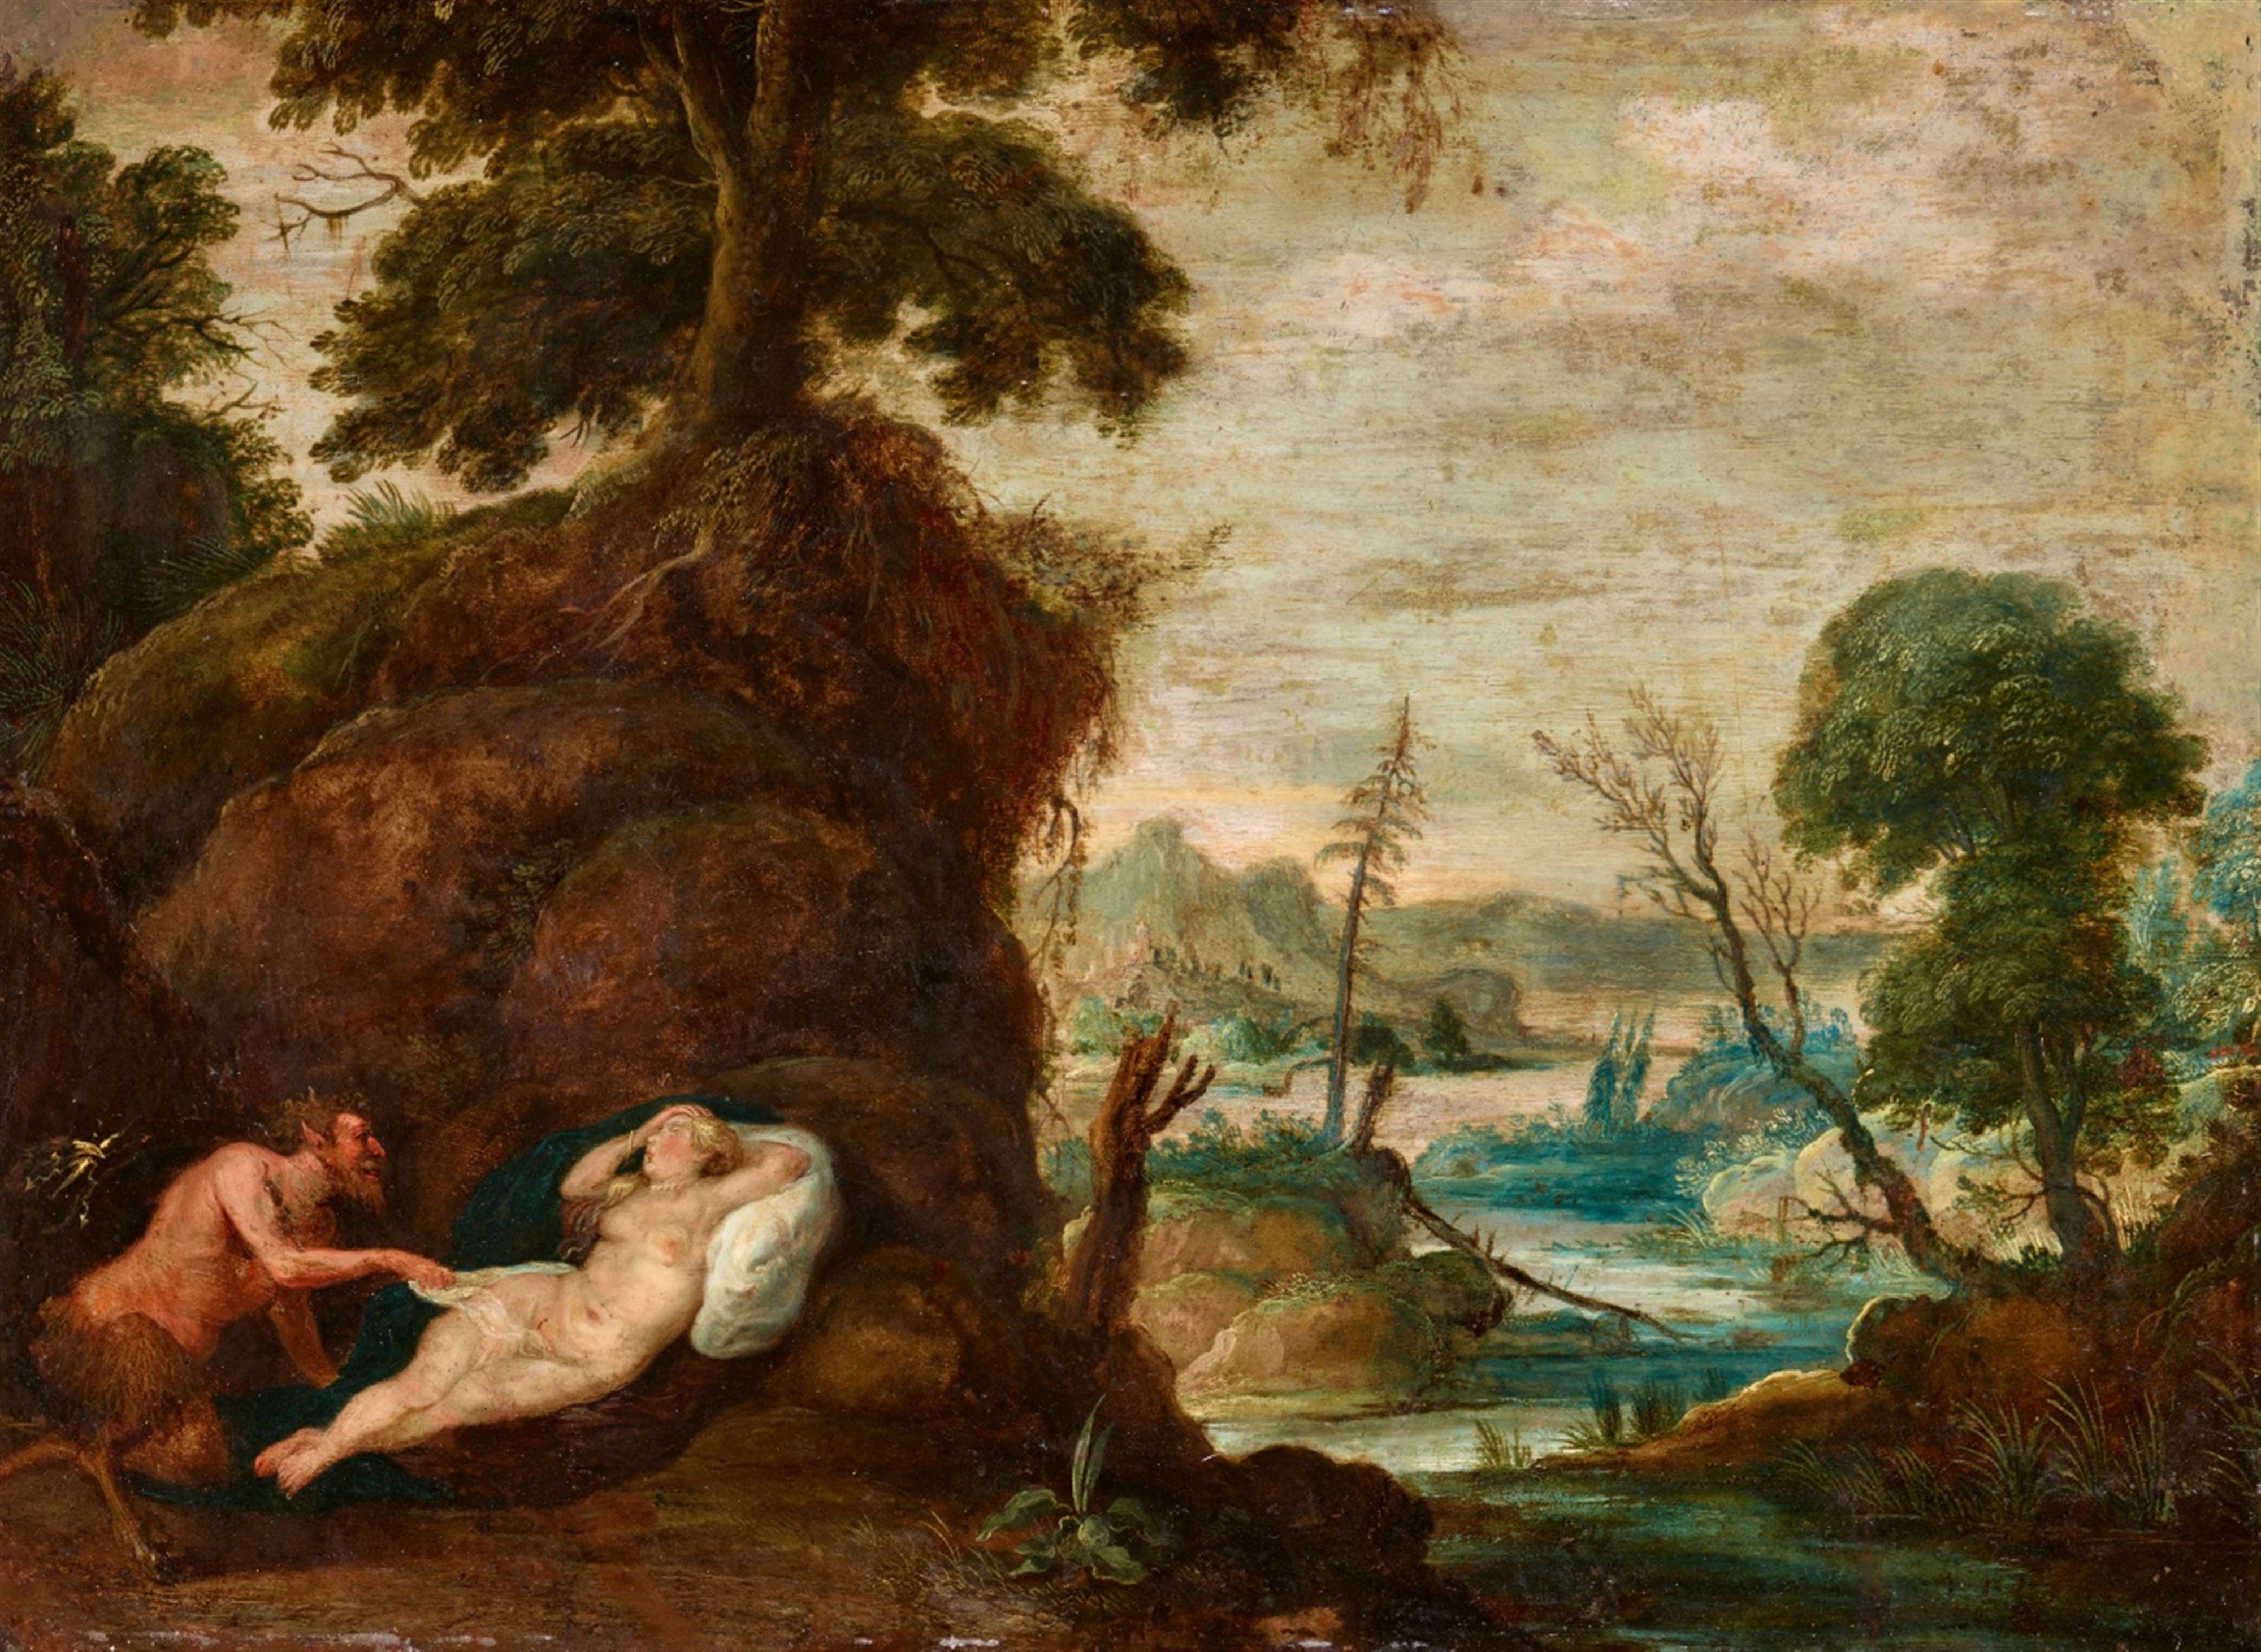 Flemish School early 17th century - Landscape with a Satyr and a Sleeping Nymph - image-1